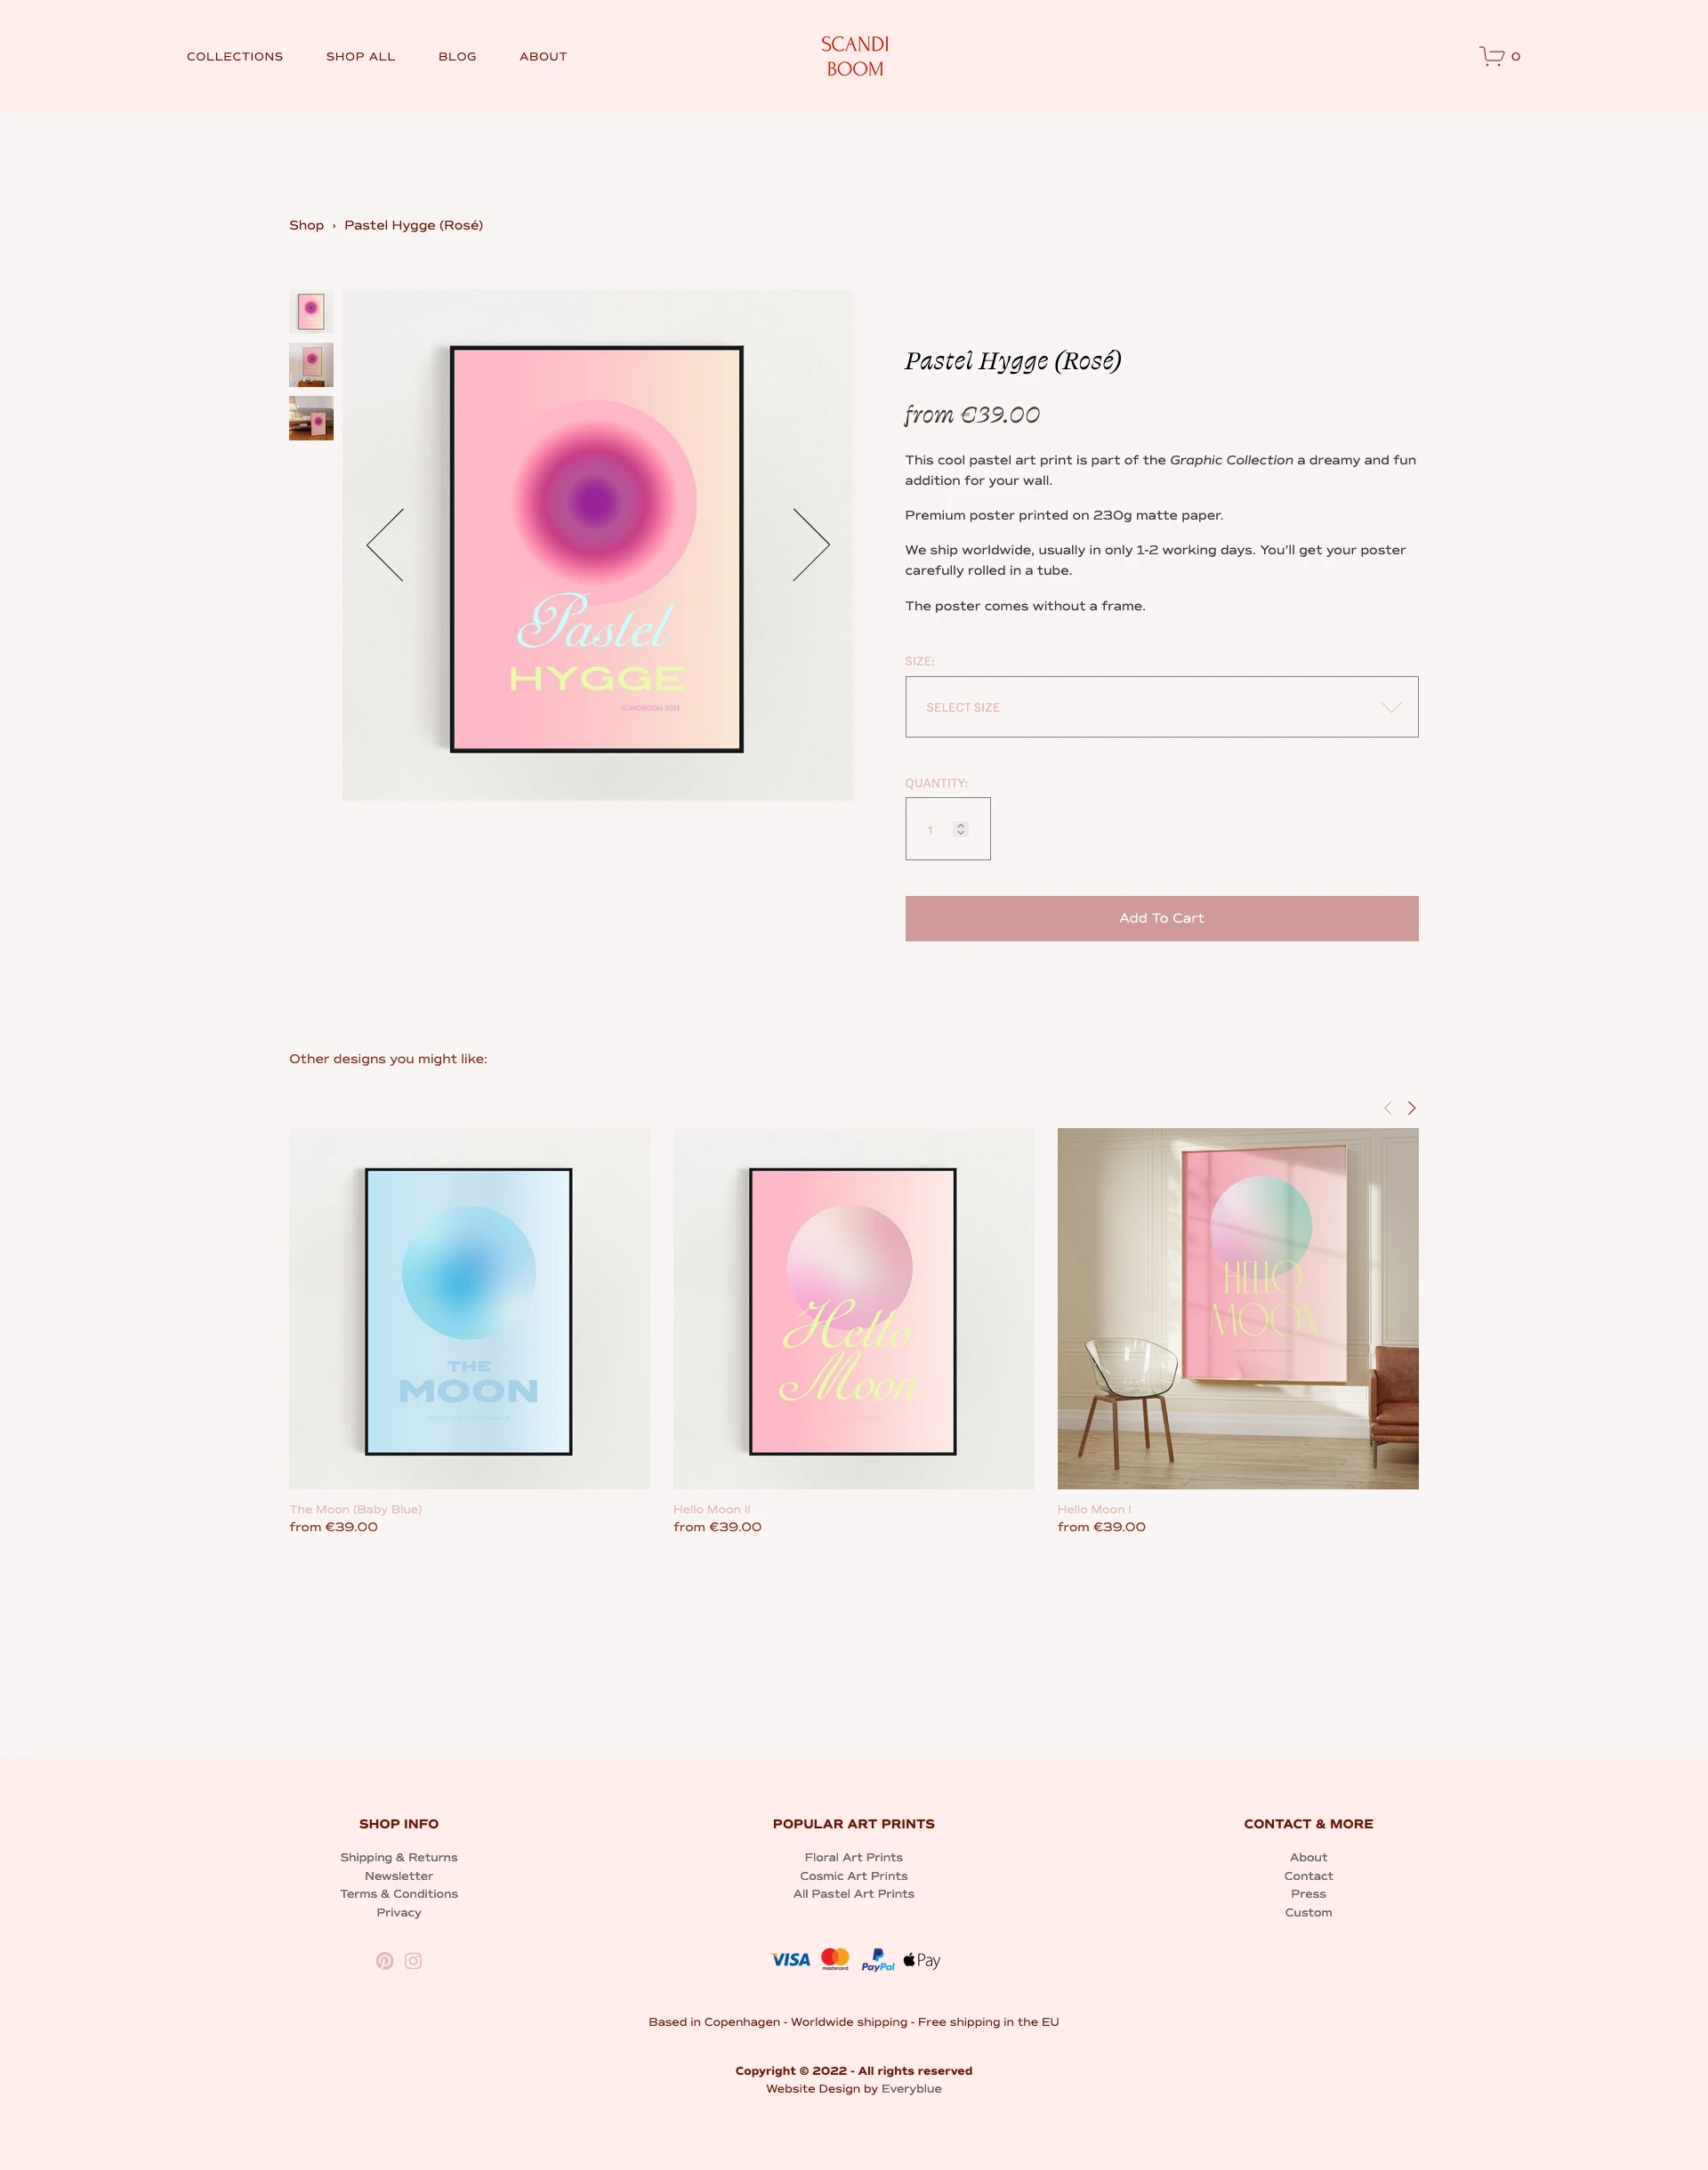 SCANDIBOOM Landing Page Example: Eye candy posters for your wall: Discover beautiful pieces to enhance your interior! Worldwide shipping from Copenhagen, Denmark.